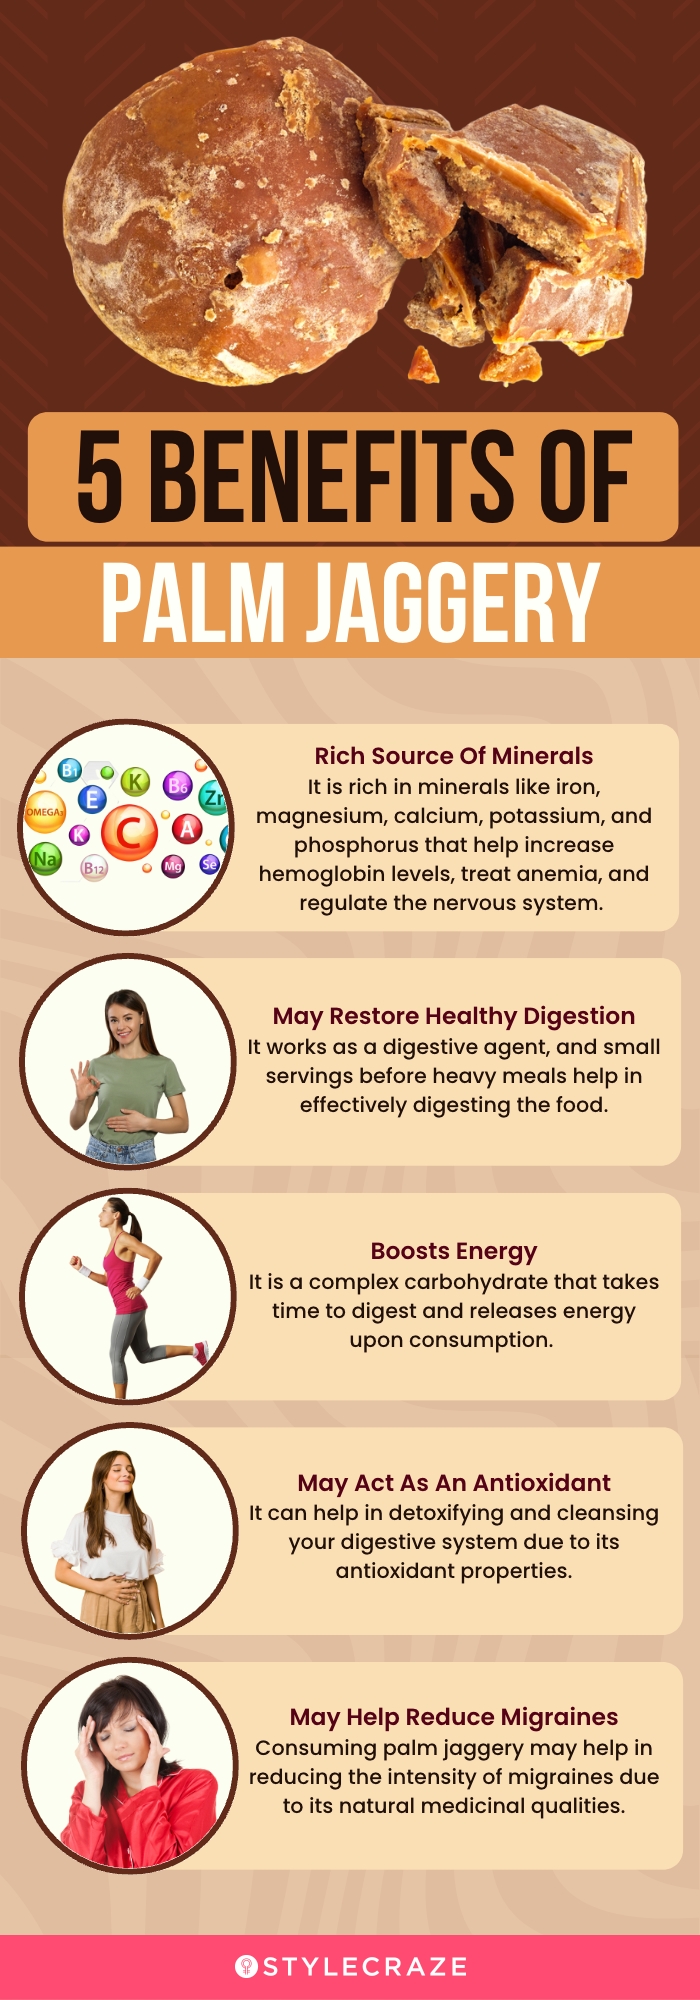 5 benefits of palm jaggery (infographic)